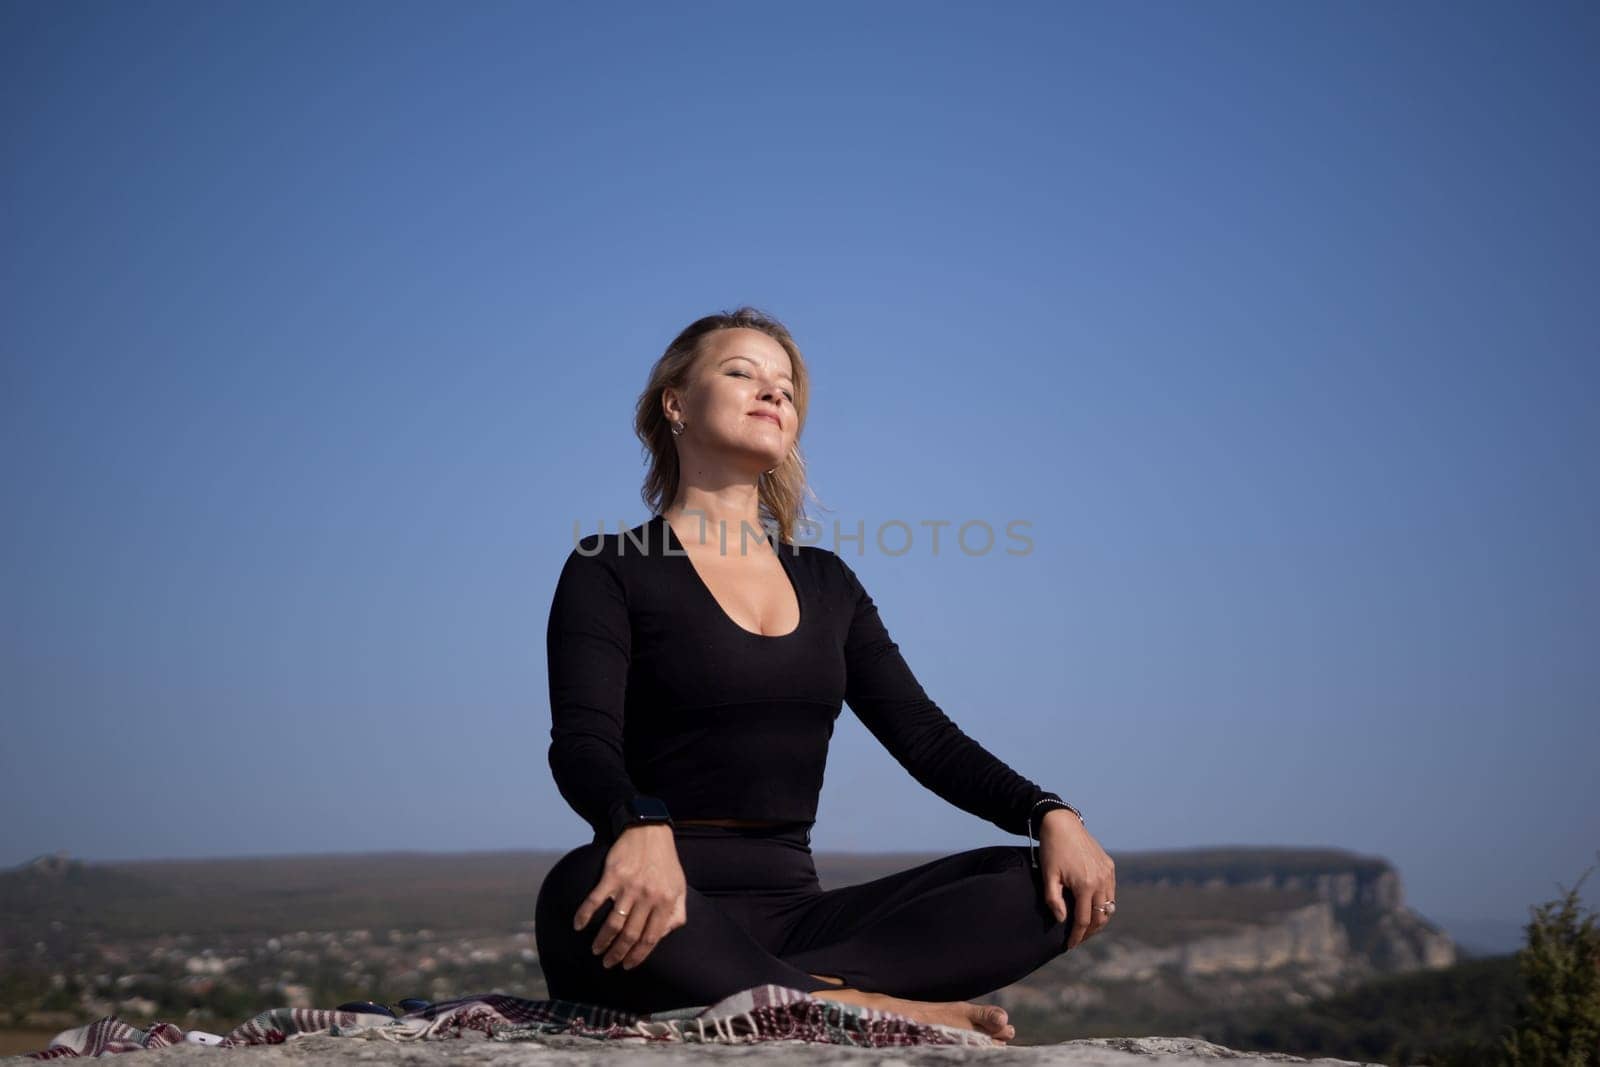 A woman is sitting on a rock with her legs crossed and her hands on her knees. She is looking up at the sky and she is in a peaceful and relaxed state